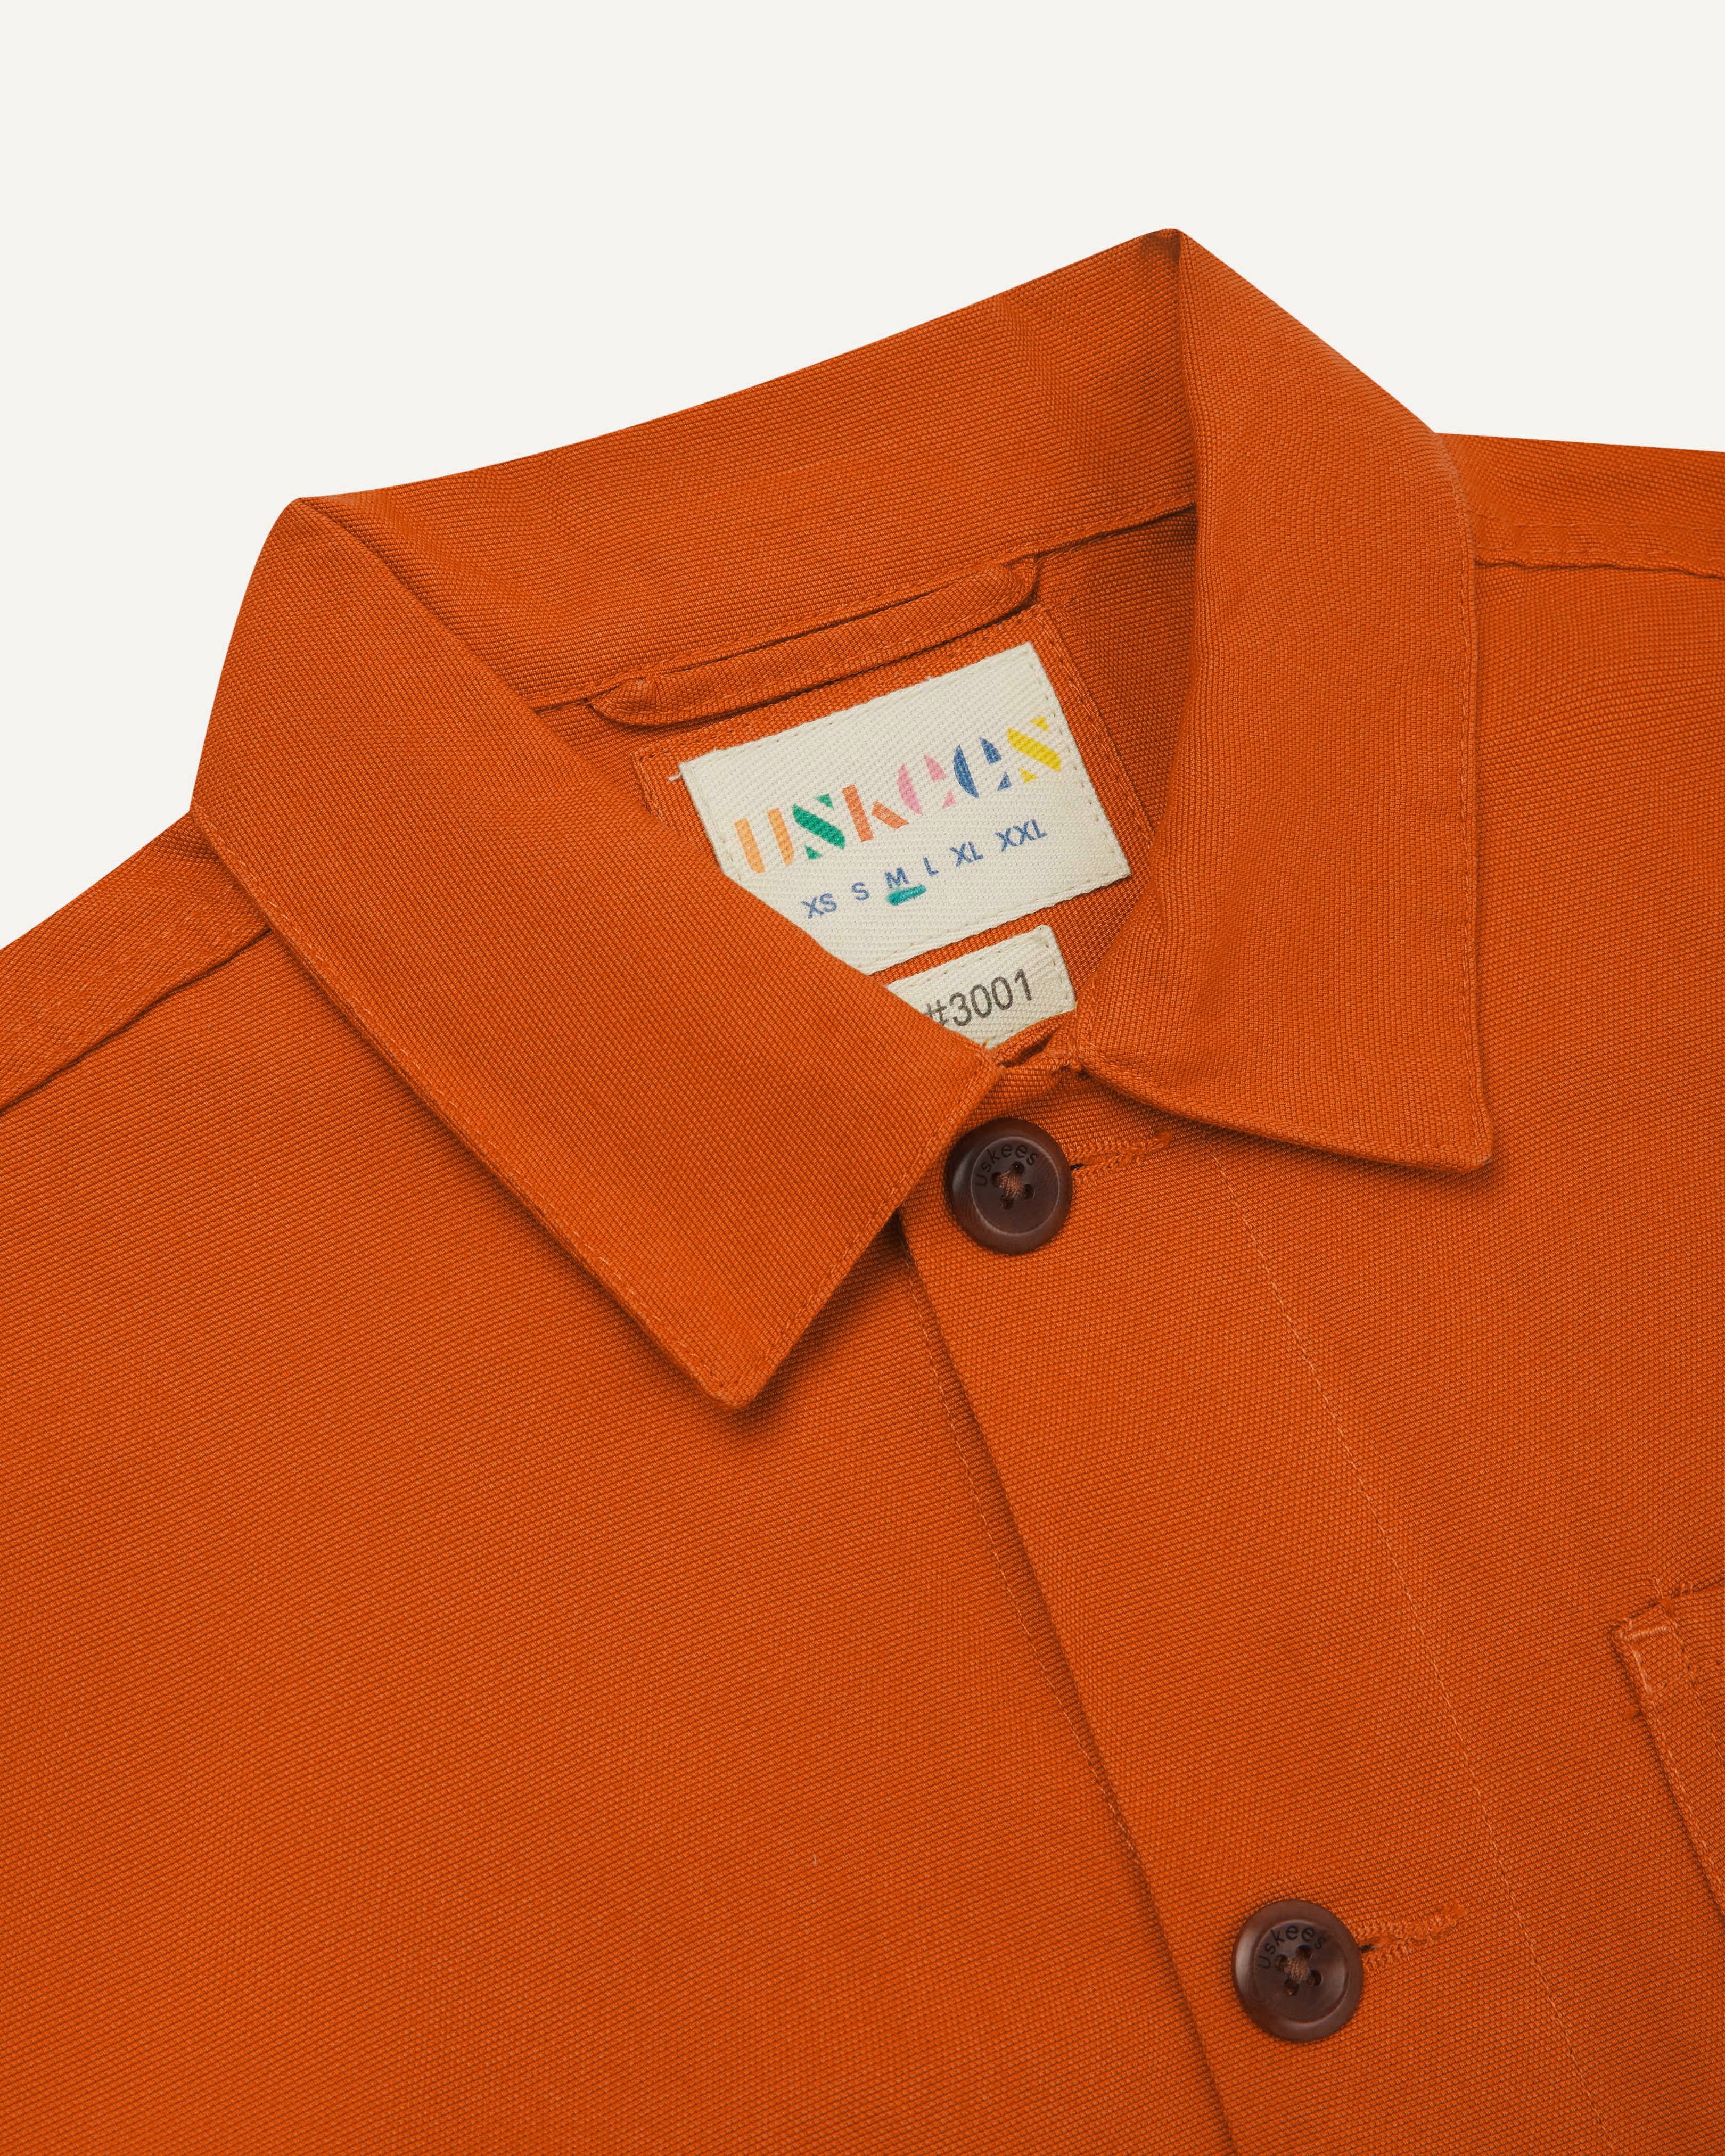 Front close shot of an uskees orange men's overshirt showing contrast brown corozo buttons and brand/size label at neck.